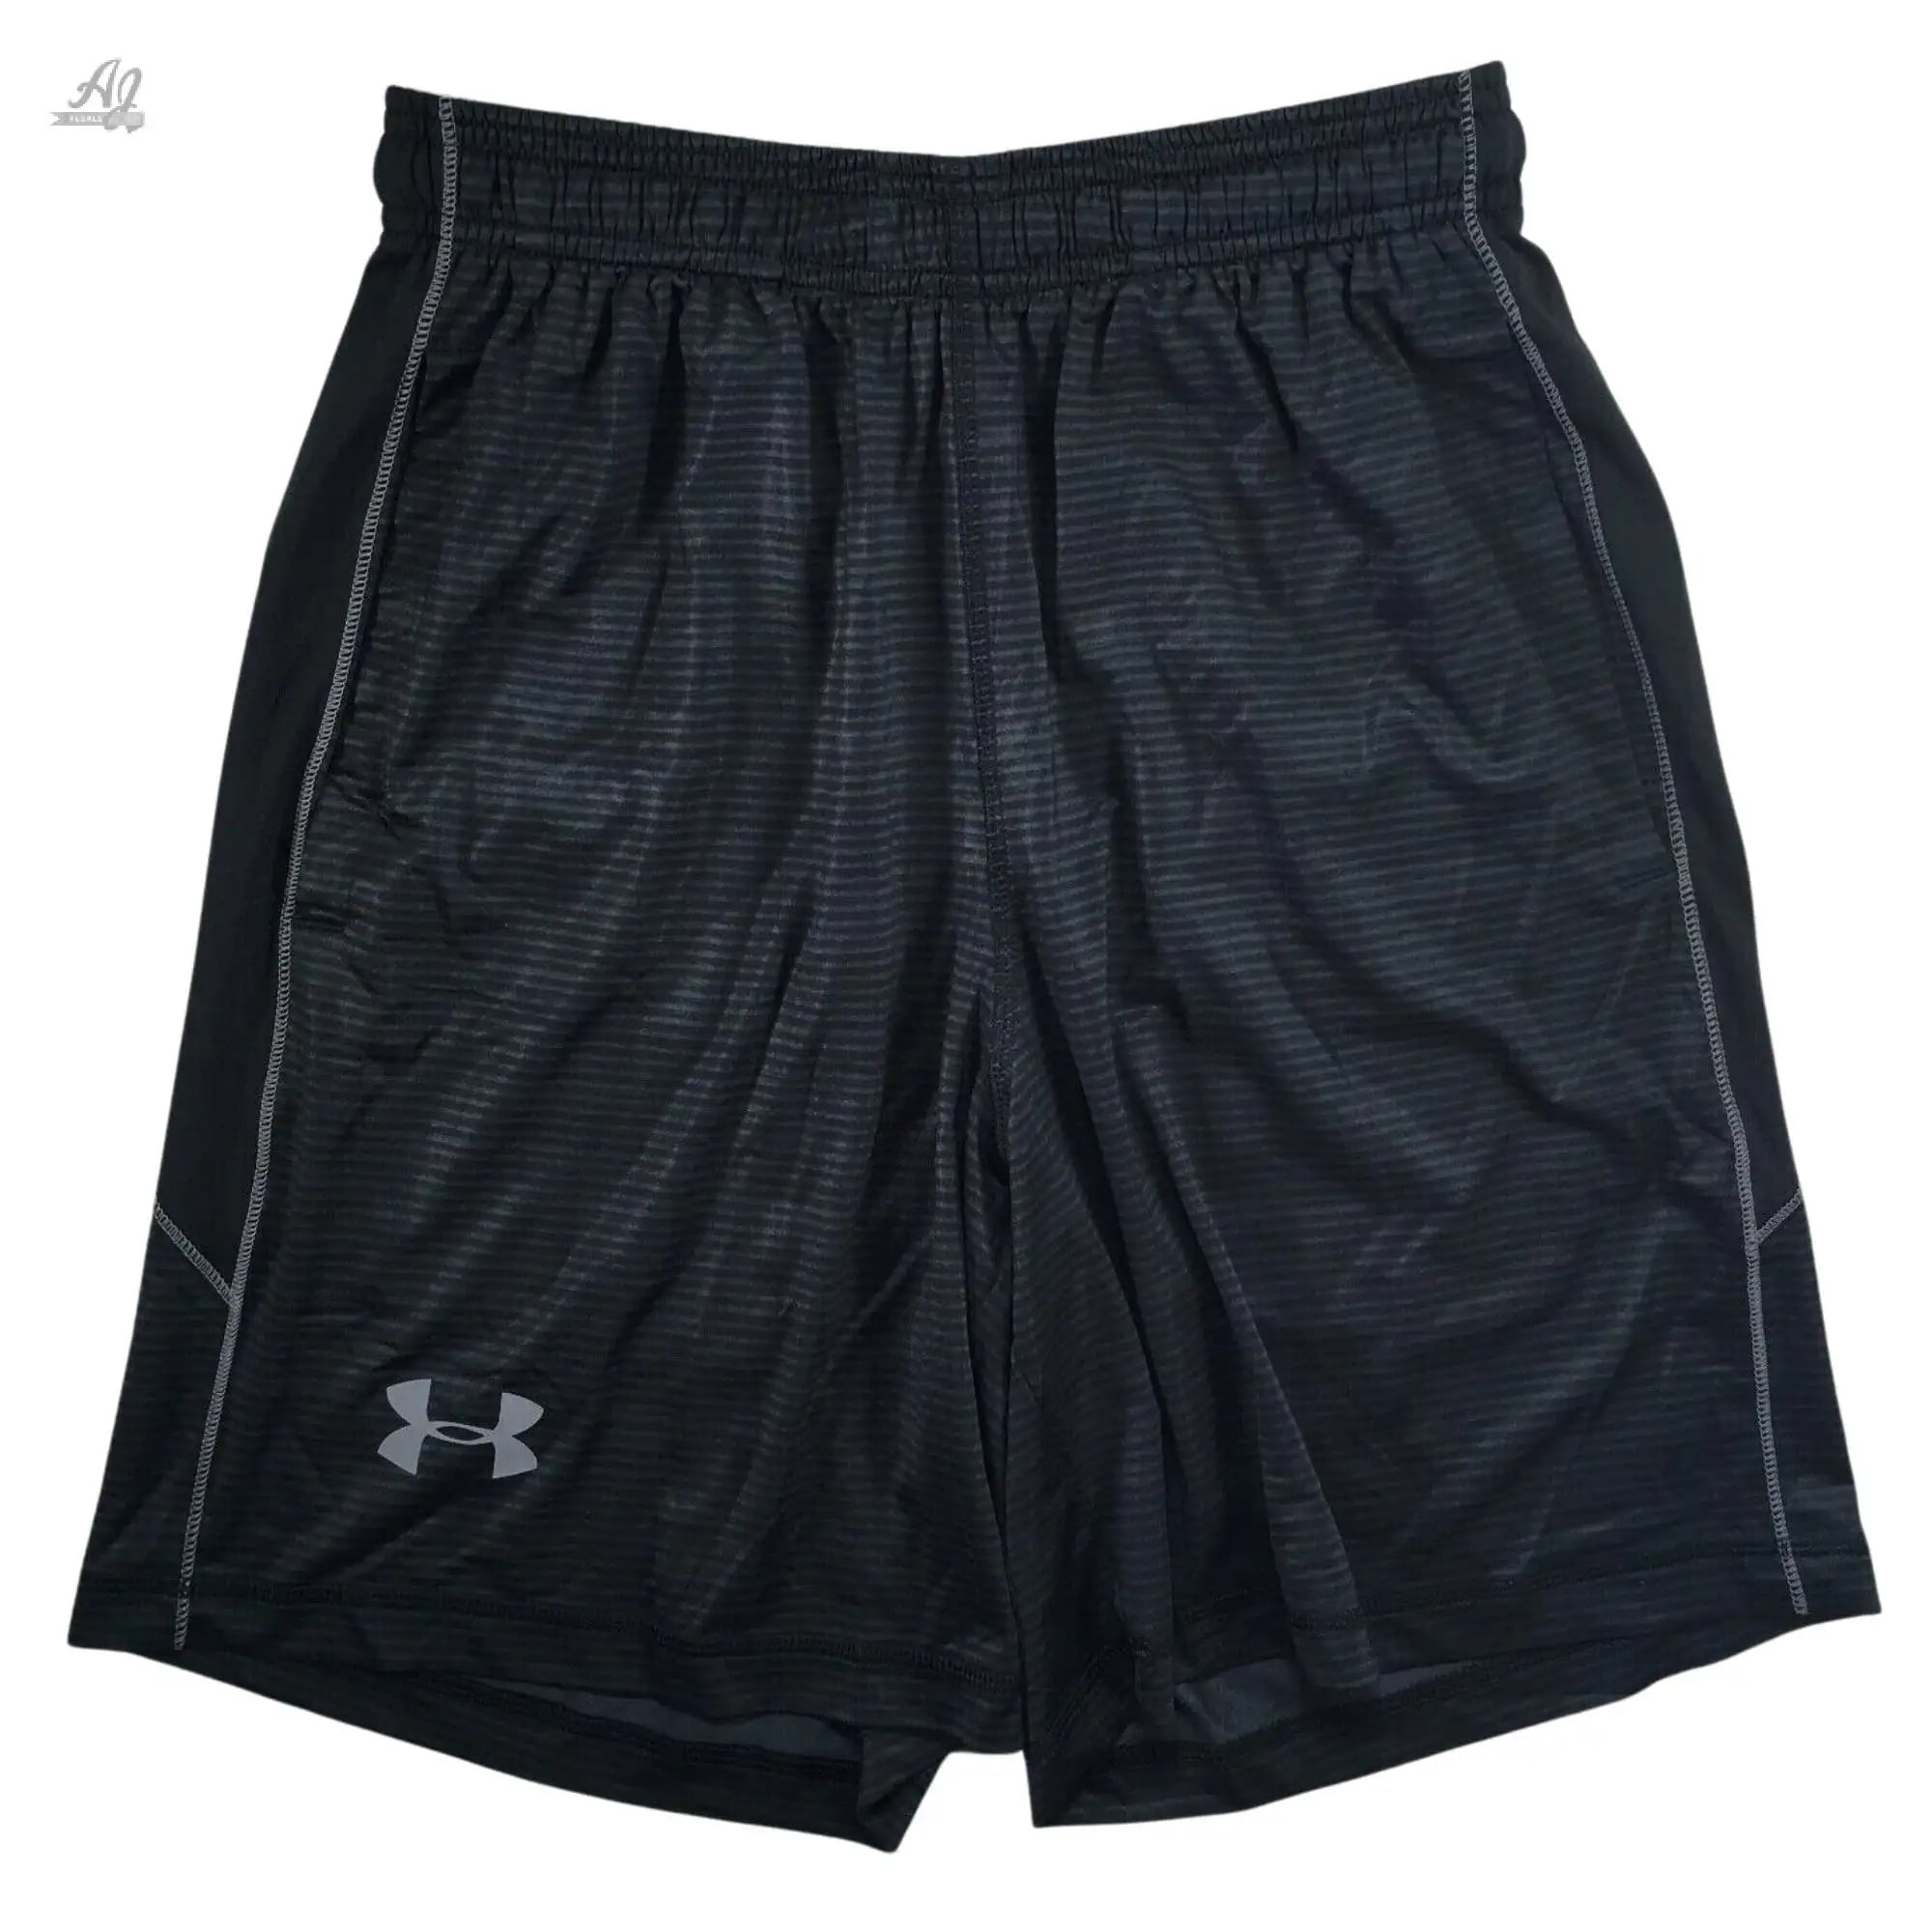 Under Armour Basketball Shorts HeatGear Gym Athletic Men's More Colors ...